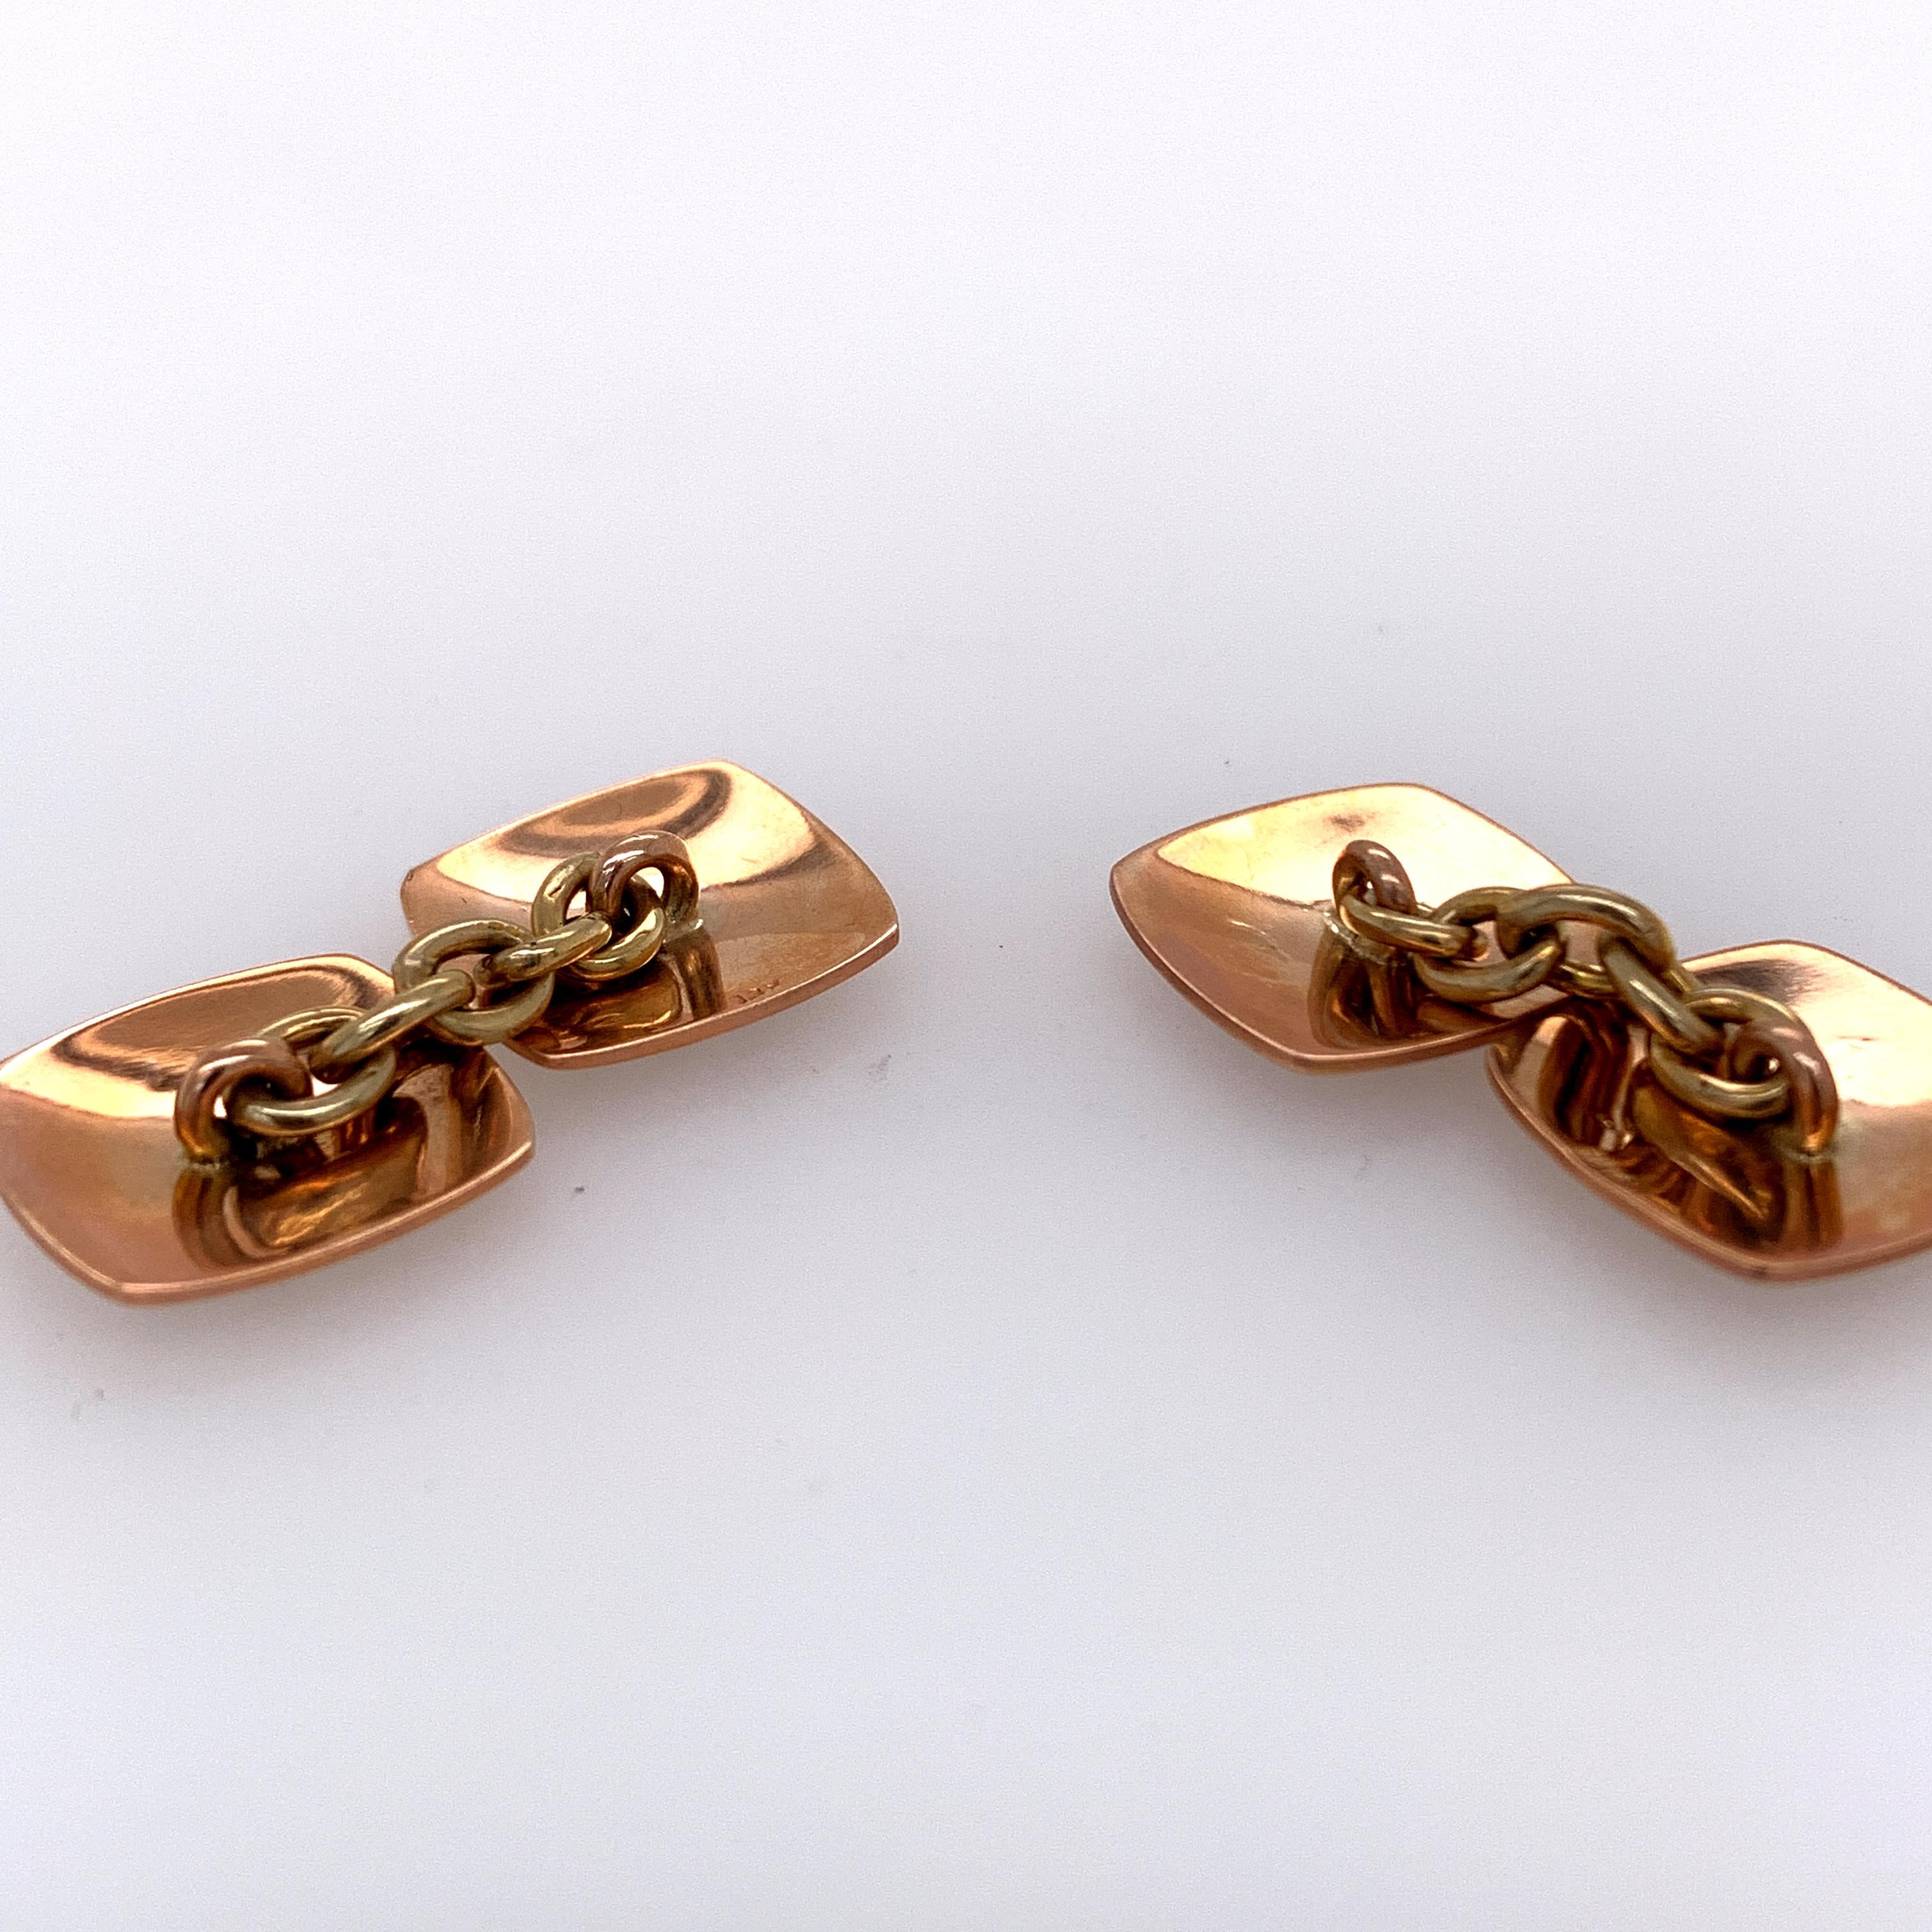 Dynamic cufflinks:  double-sided with black and white checkerboard pattern.  Set in 14K rose gold.  2/3